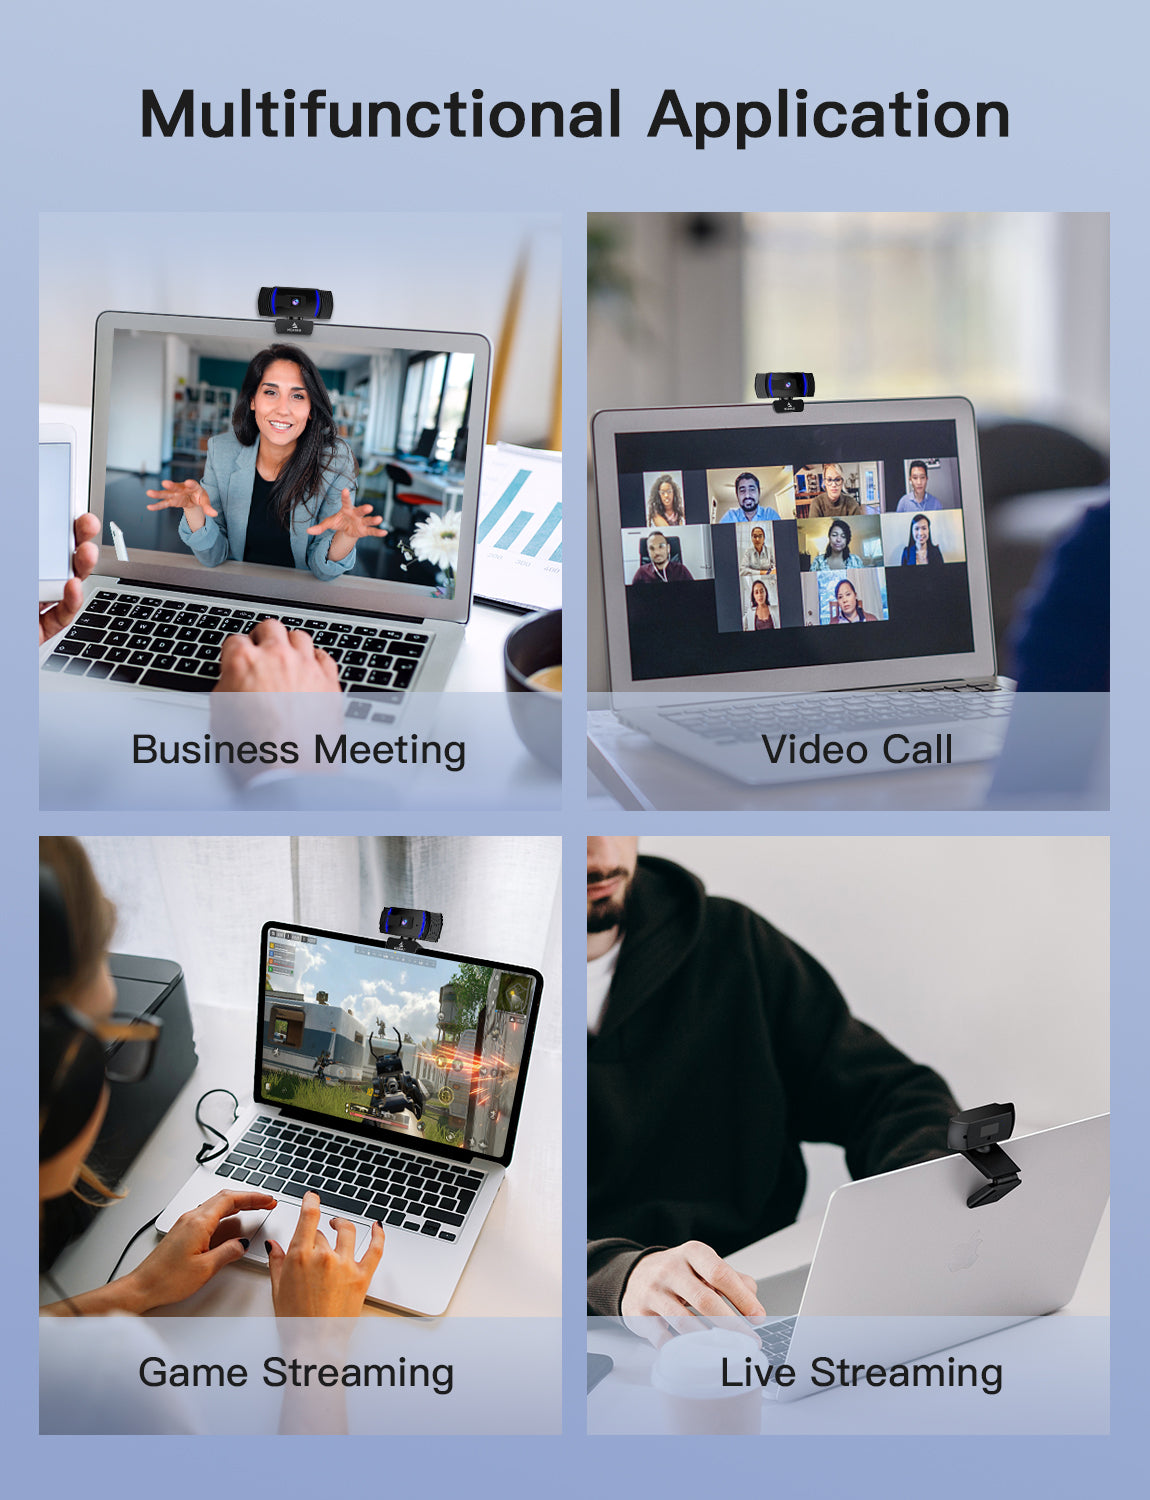 Webcam connects to the laptop for Business Meetings, Games, Video Calls, and Live Streaming.